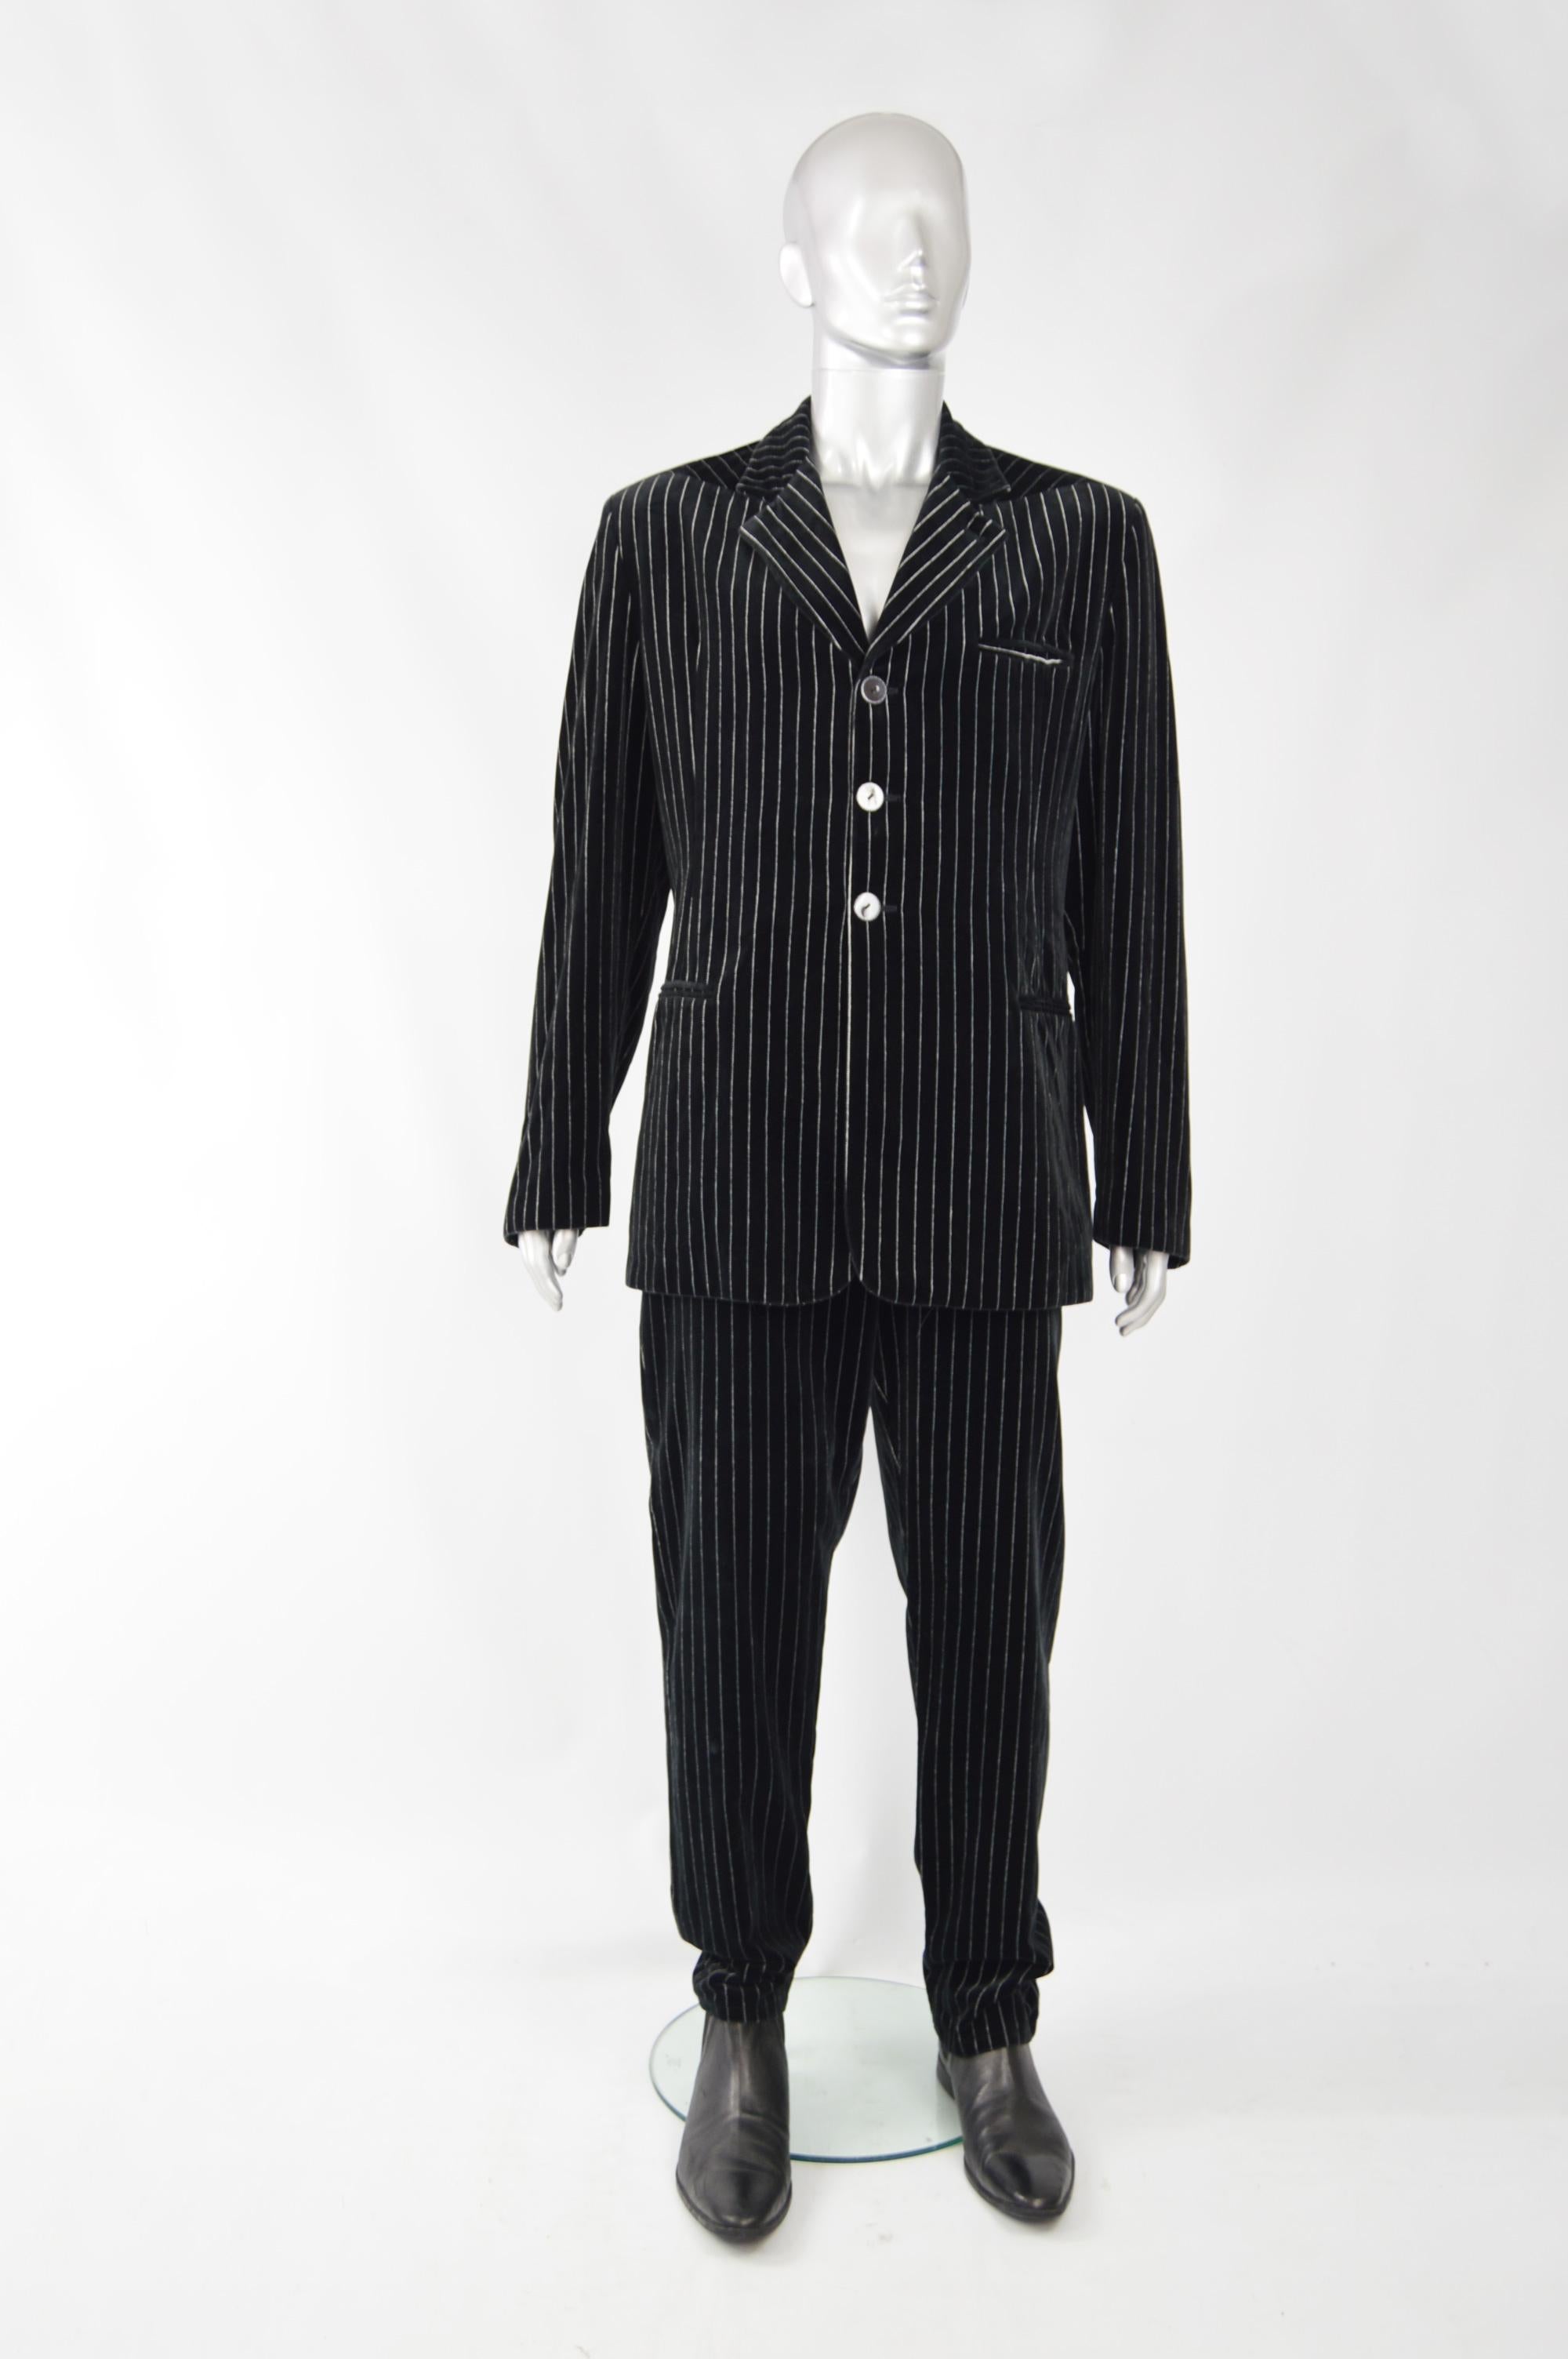 An amazing vintage mens suit from the 80s by genius Italian fashion designer duo, Calugi e Giannelli. In a black velvet with grey pinstripe running throughout. 

Size: Jacket Marked 54, Trousers 52 but the jacket fits like a Large and the trousers